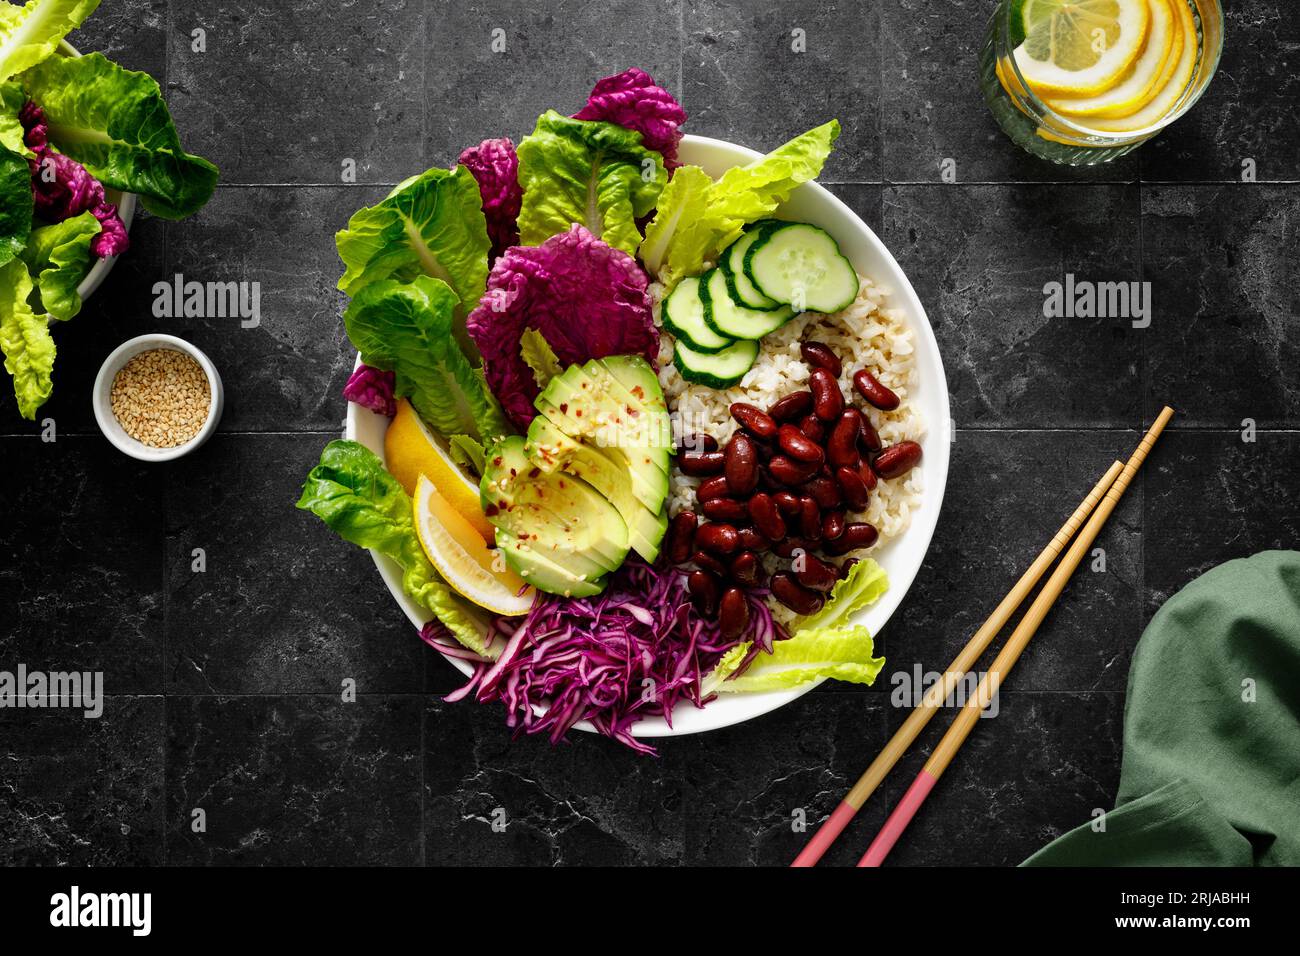 Vegan avocado fresh green salad bowl with red kidney beans, rice, red and chinese napa cabbage, healthy diet food, top view Stock Photo